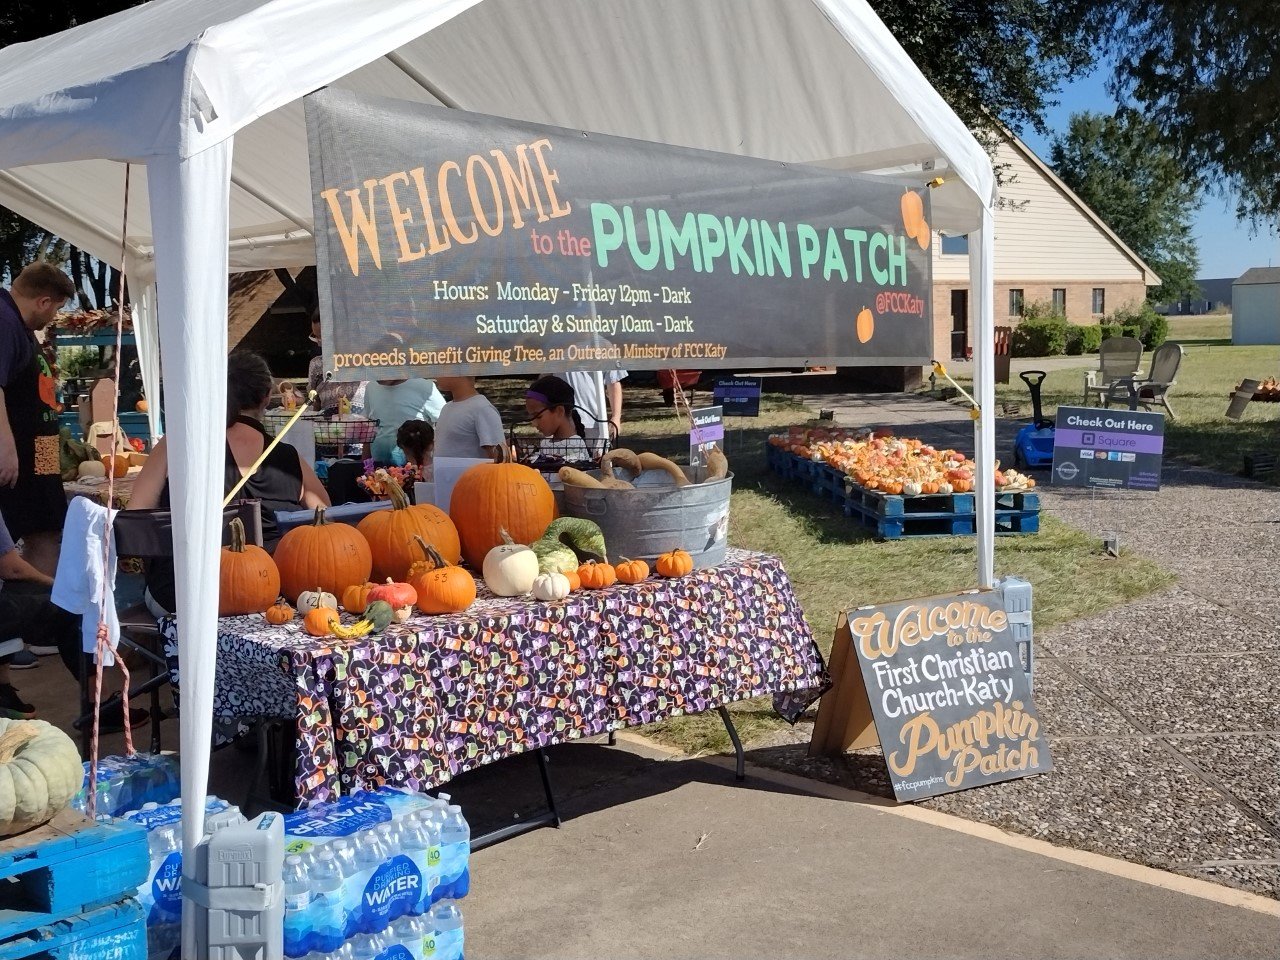 First Christian Church in Katy, 22101 Morton Ranch Road, has opened a pumpkin patch featuring pumpkins for sale. Proceeds benefit Giving Tree, an outreach ministry of the church. Hours are from 12-p.m. to dark Monday-Friday and 10 a.m. to dark Saturdays and Sundays throughout the month of October.